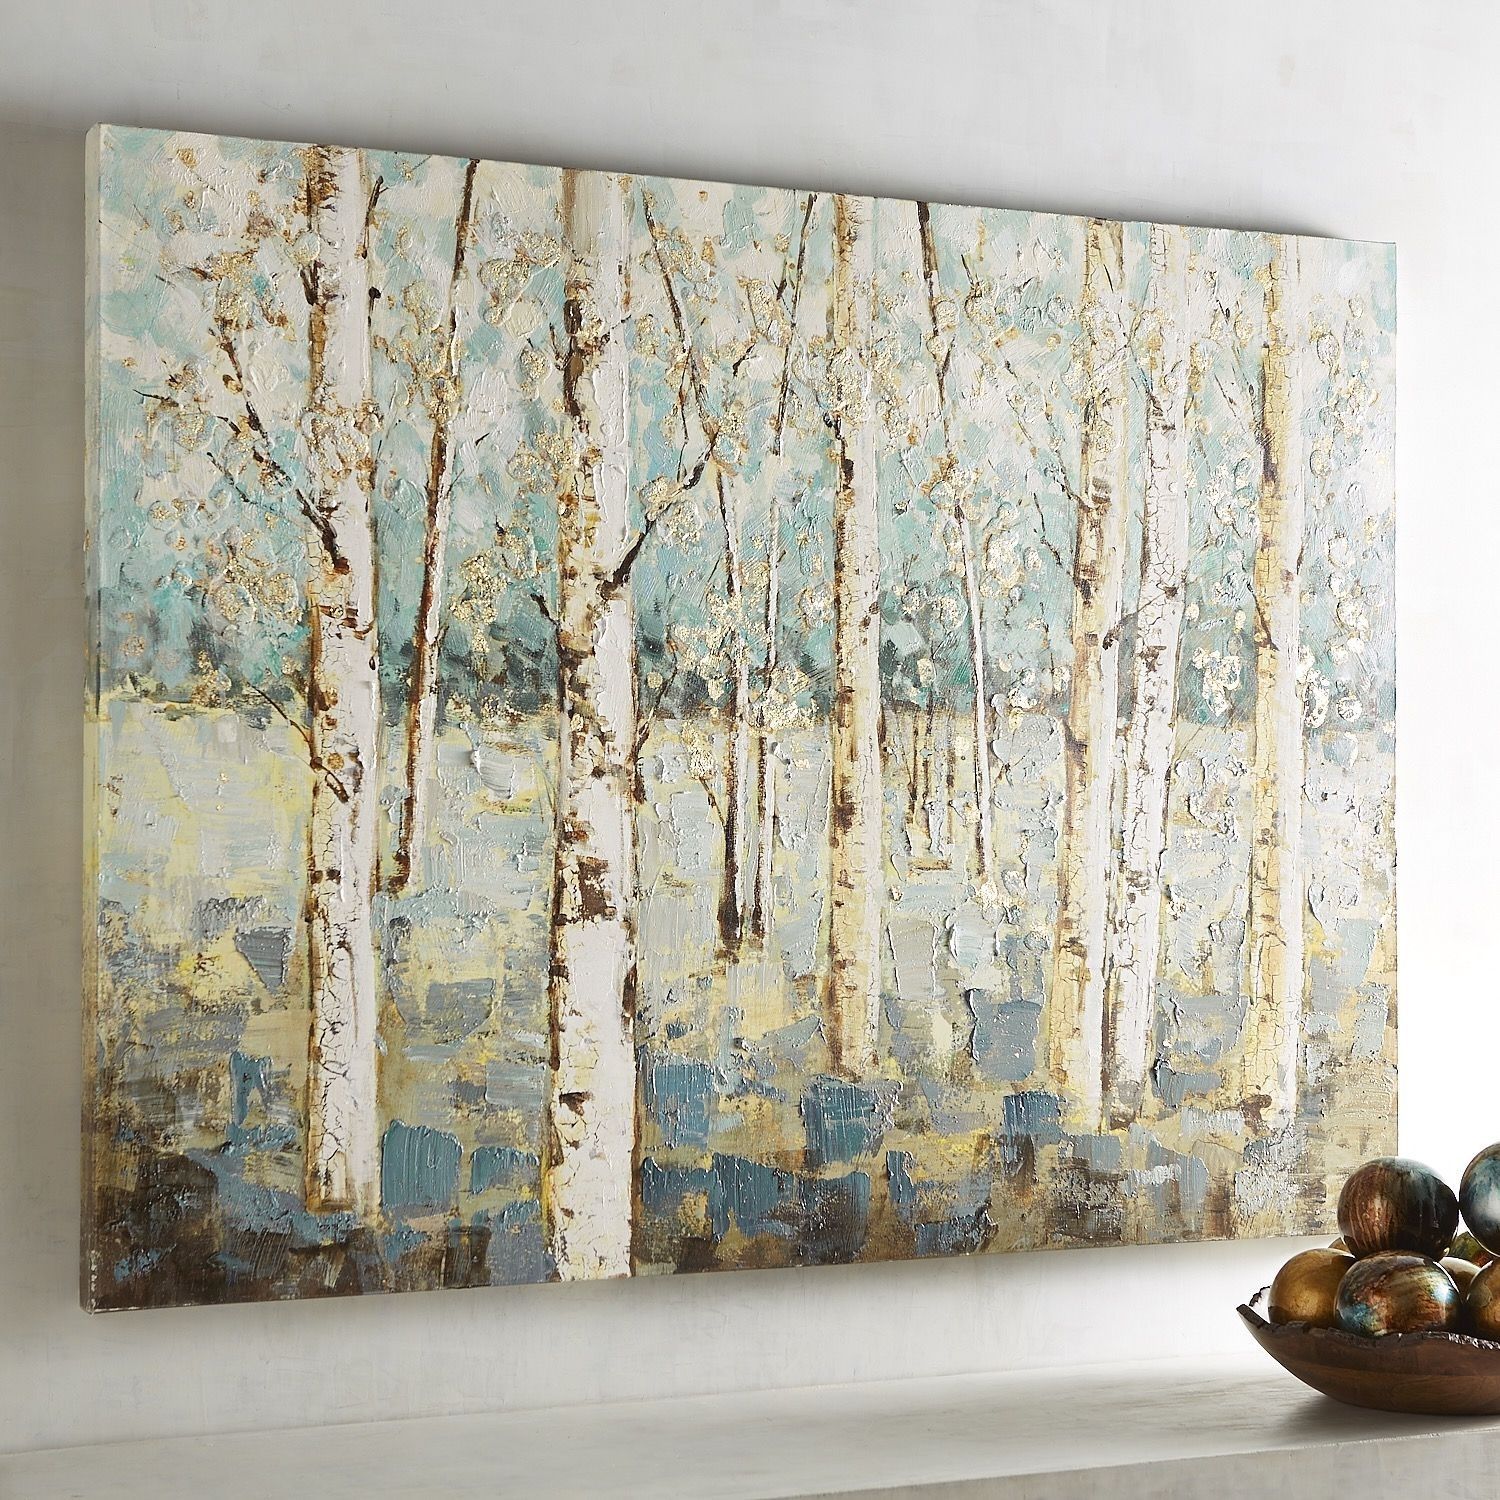 Shades Of Blue Birch Tree Wall Art | Products | Pinterest | Tree Art With Birch Tree Wall Art (View 5 of 20)